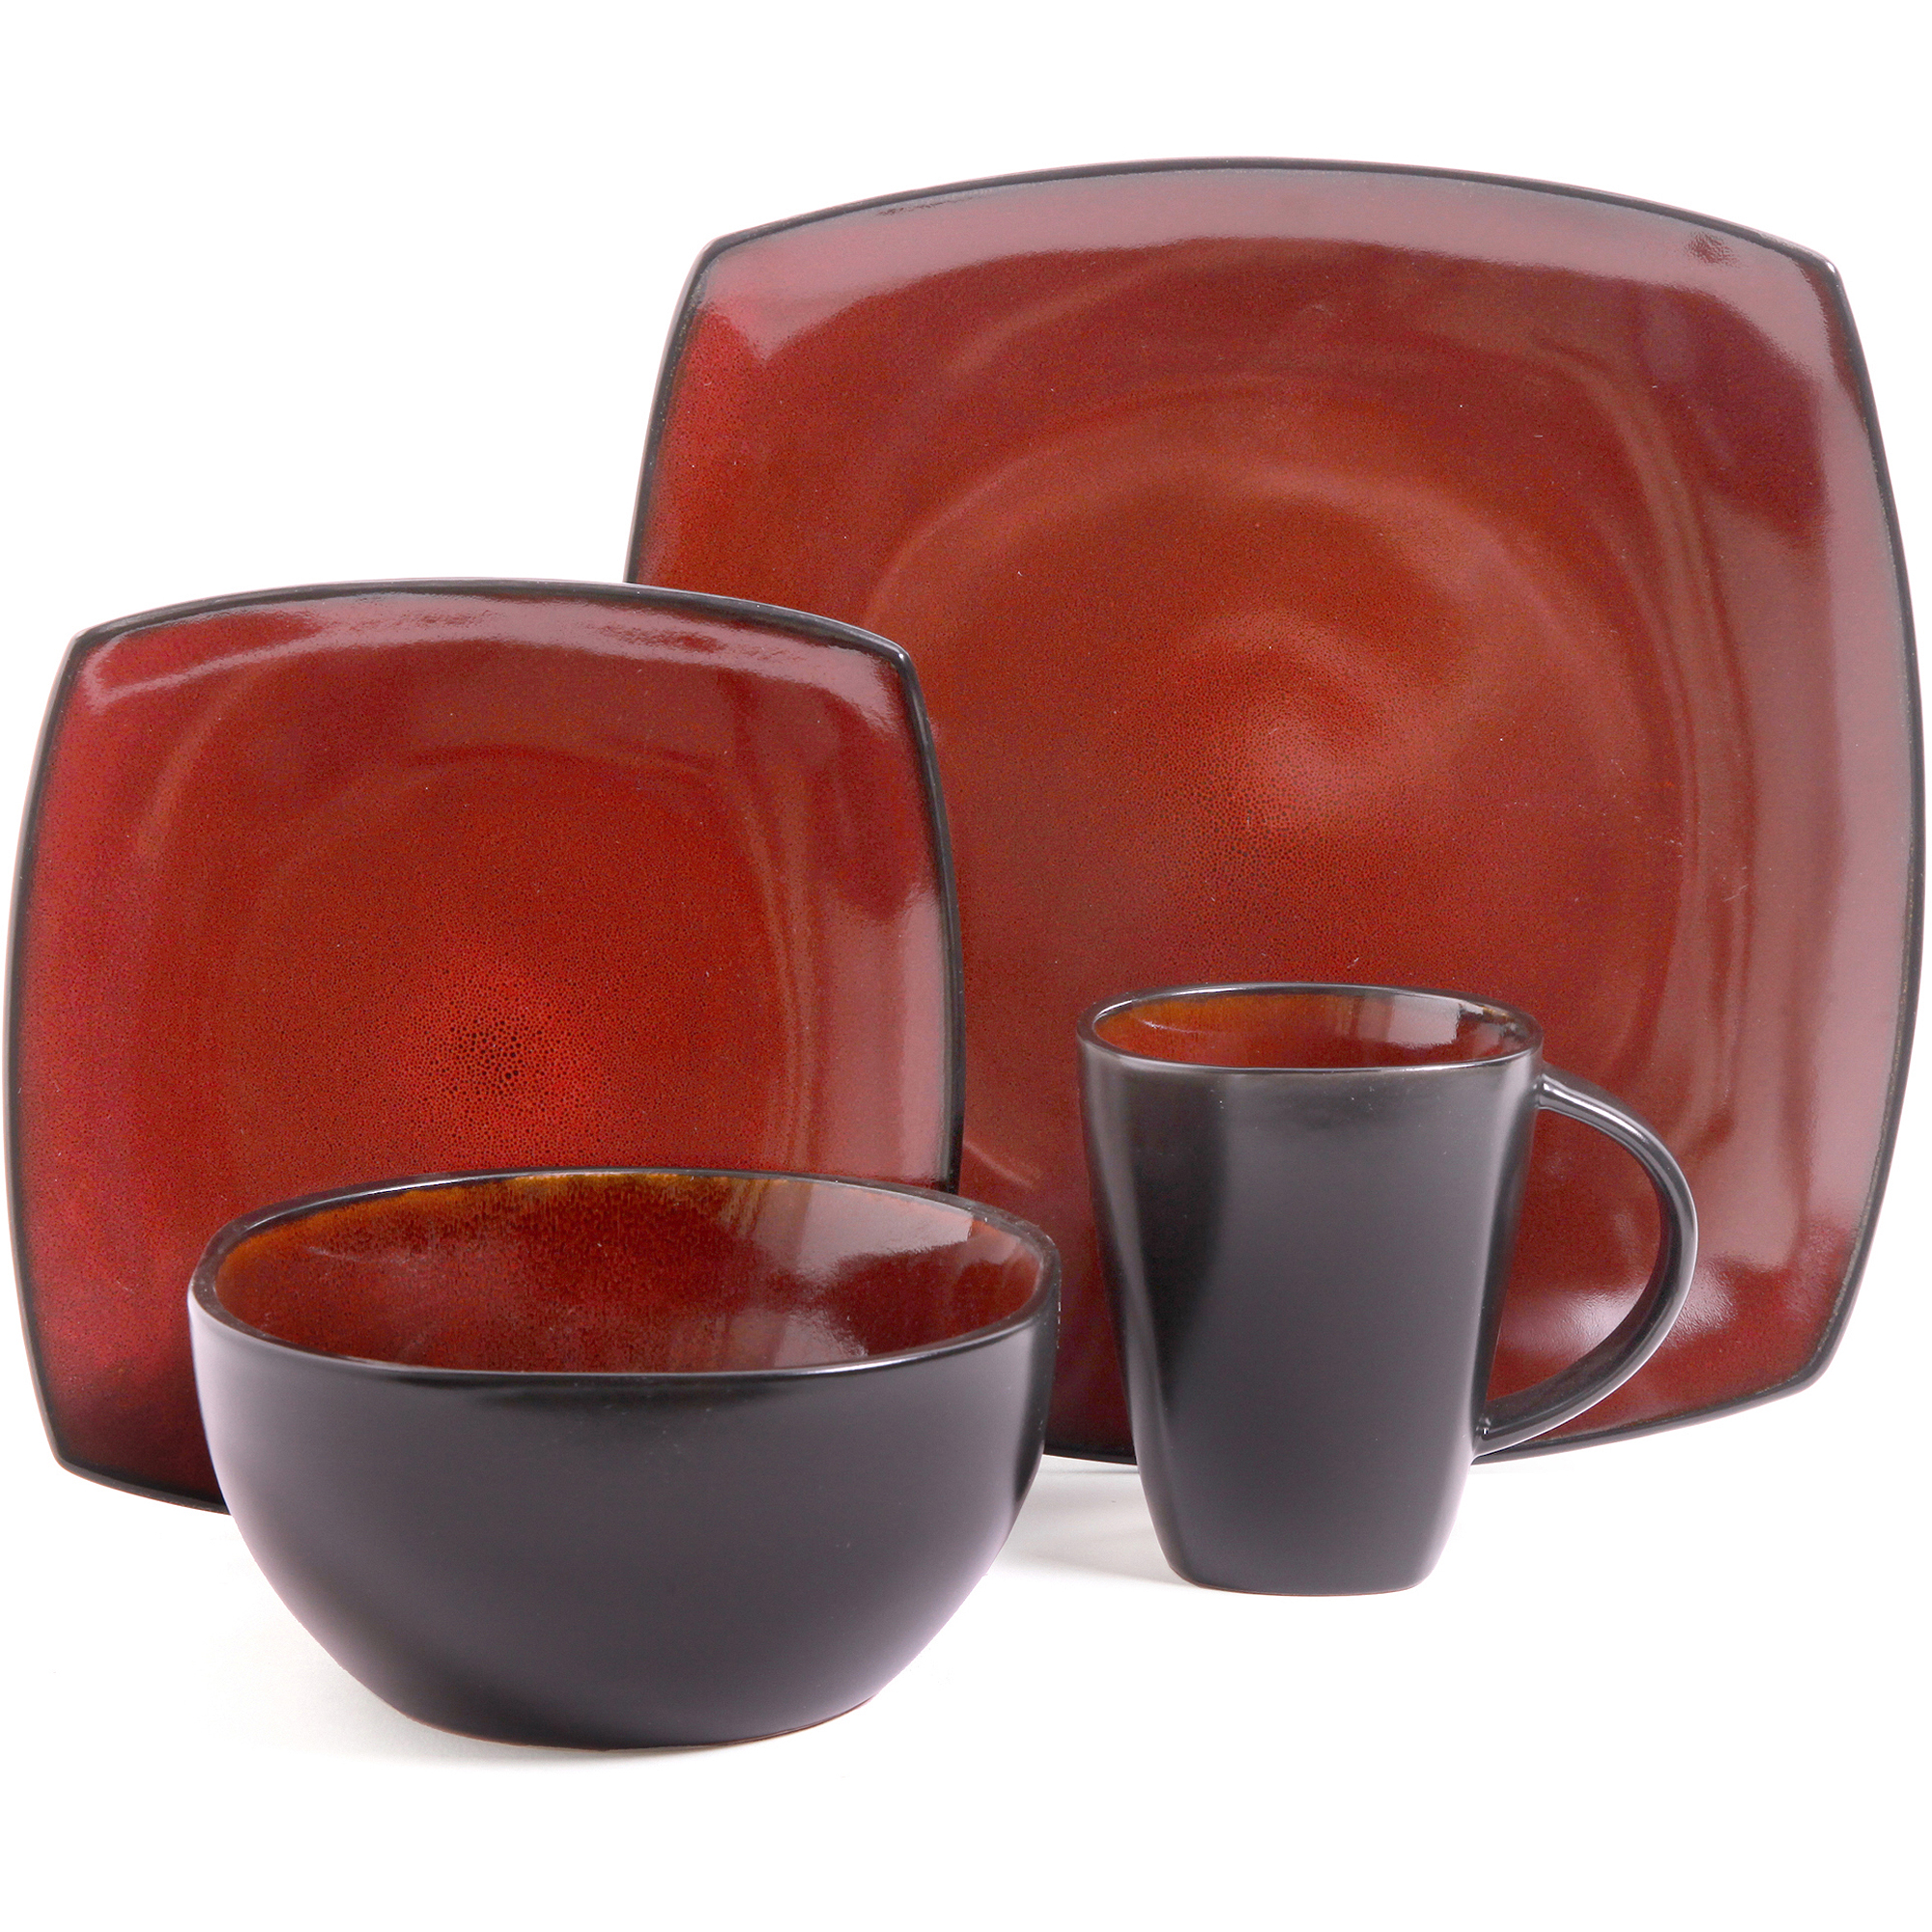 Better Homes & Gardens 16-Piece Dinnerware Set, Tuscan Red - image 2 of 6